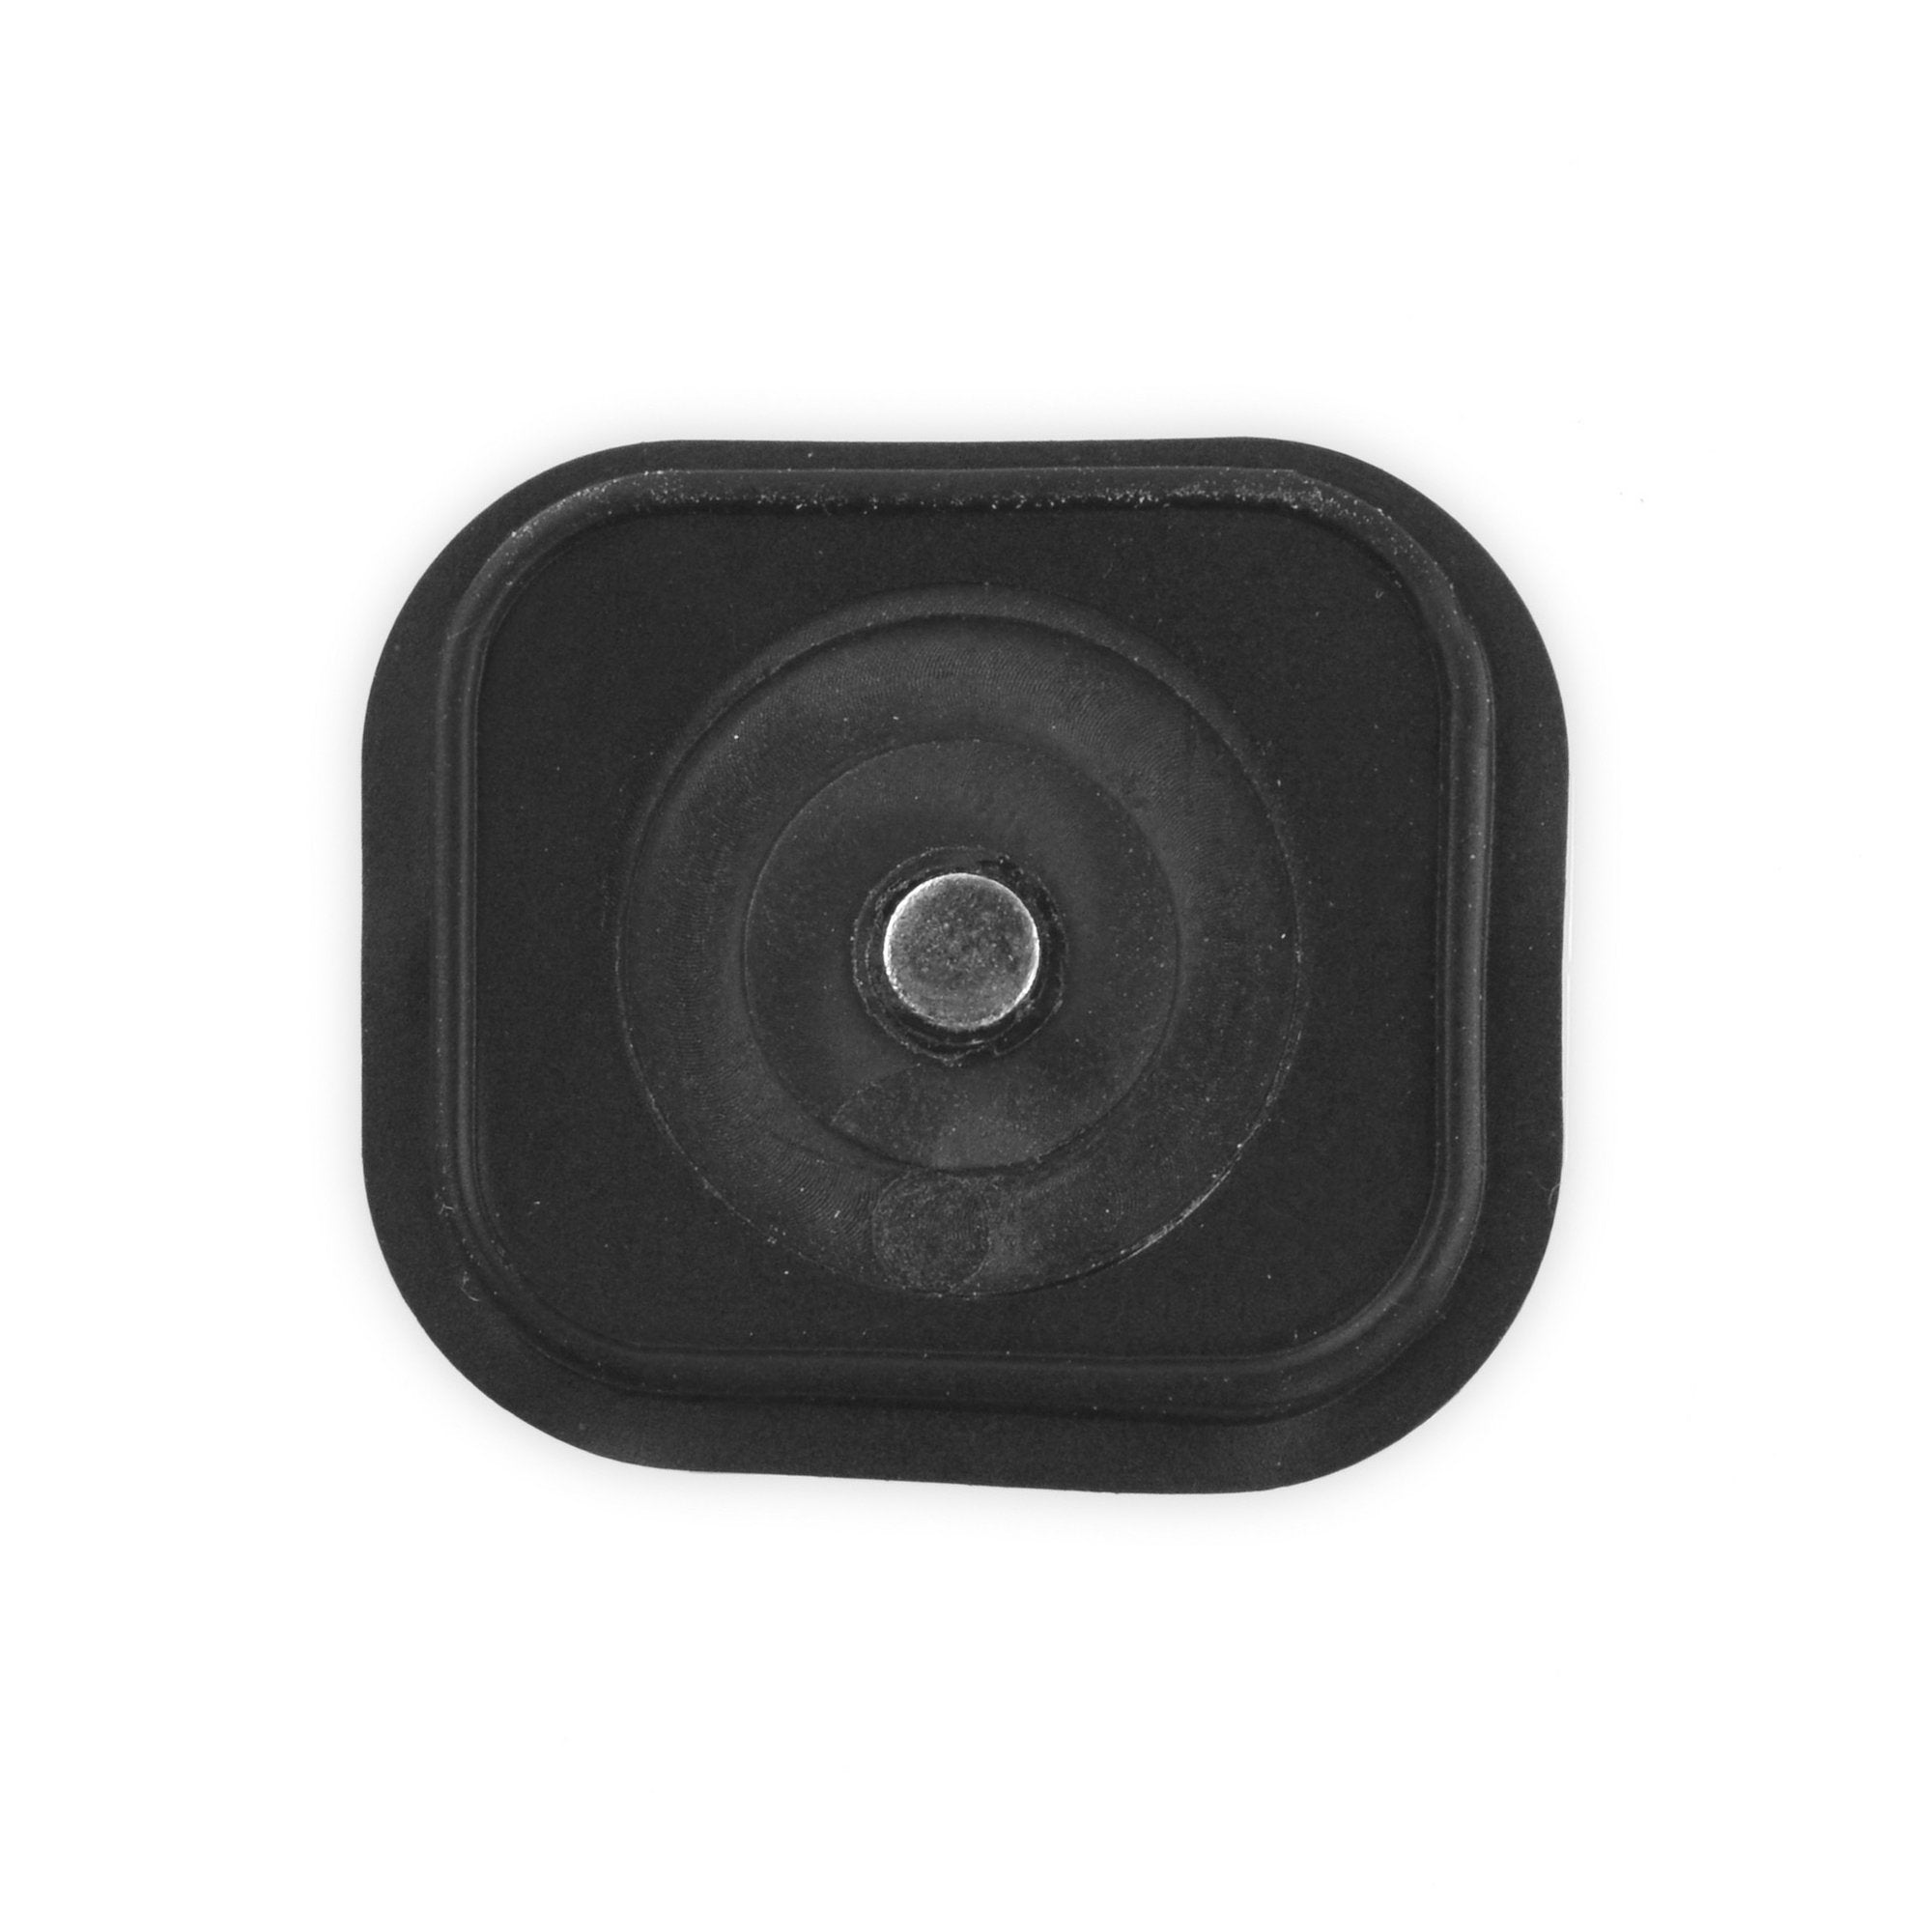 iPhone 5 and 5c Home Button Black New Part Only